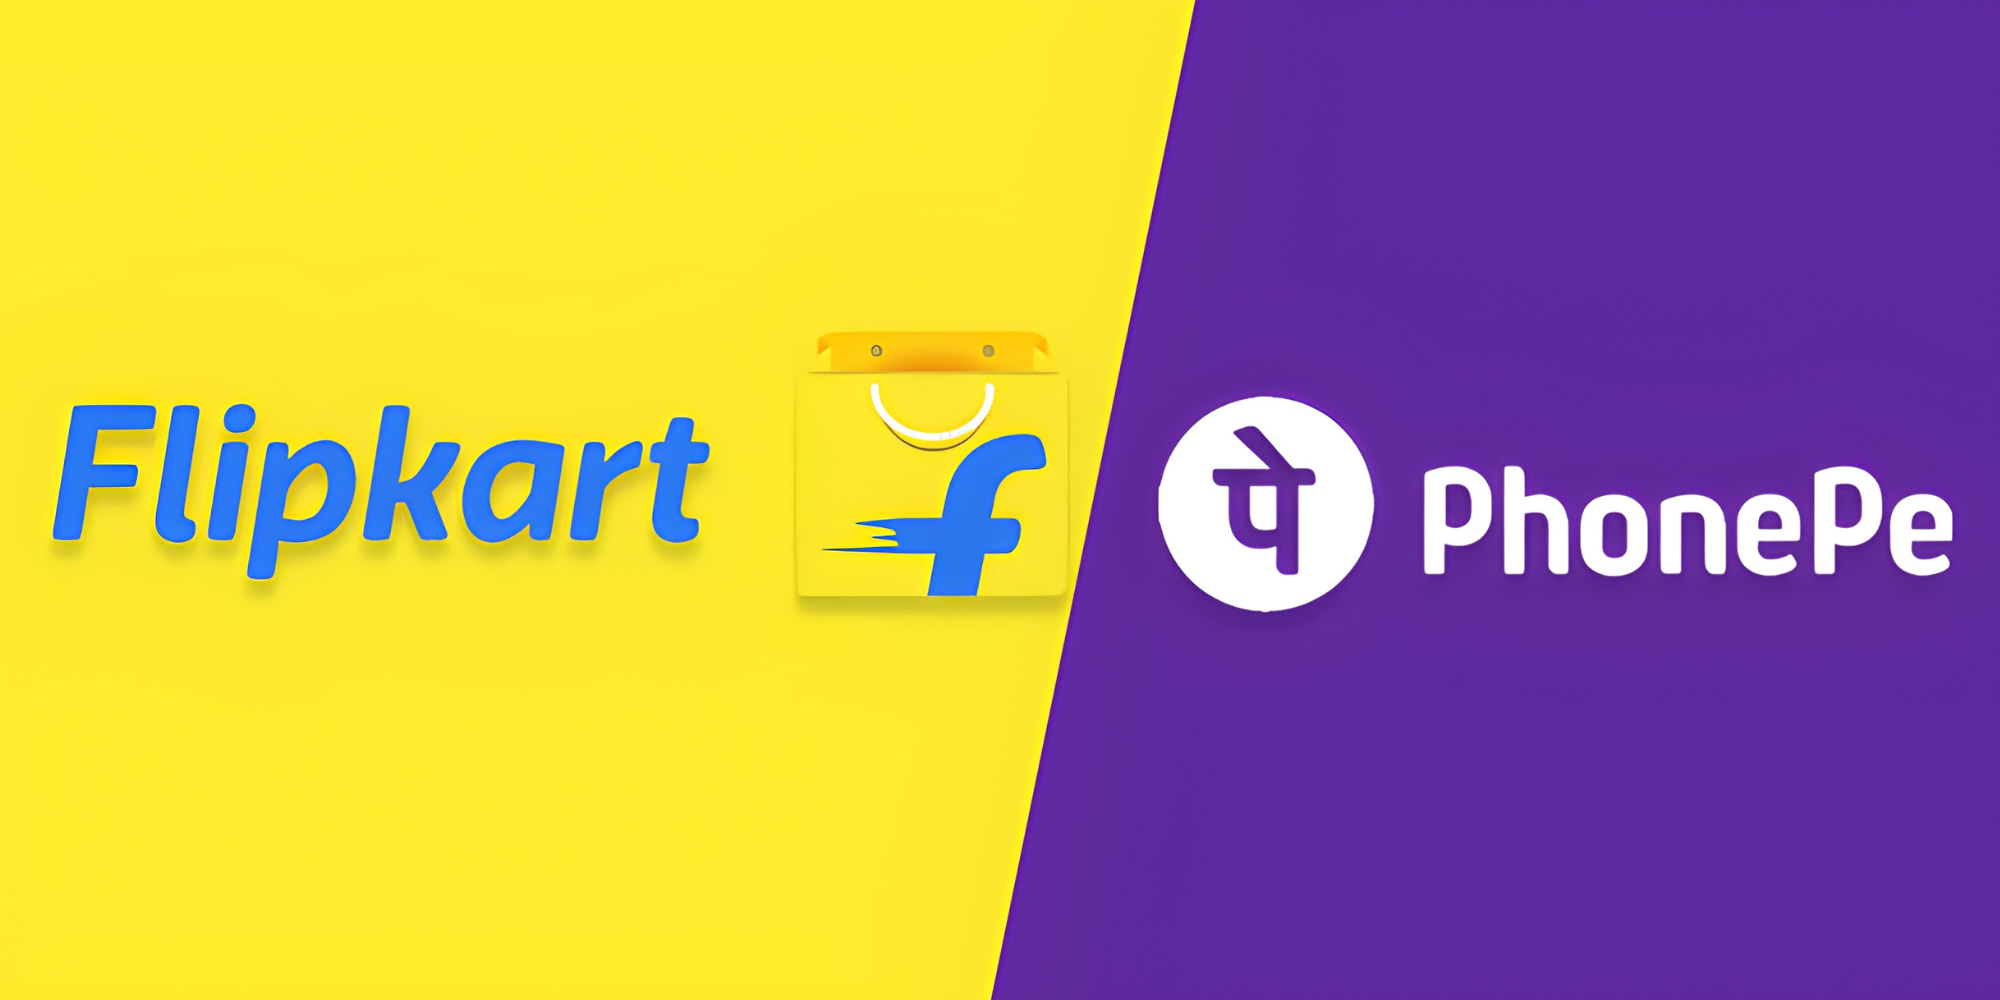 Walmart: Flipkart and PhonePe Set to Become $100B Businesses in India